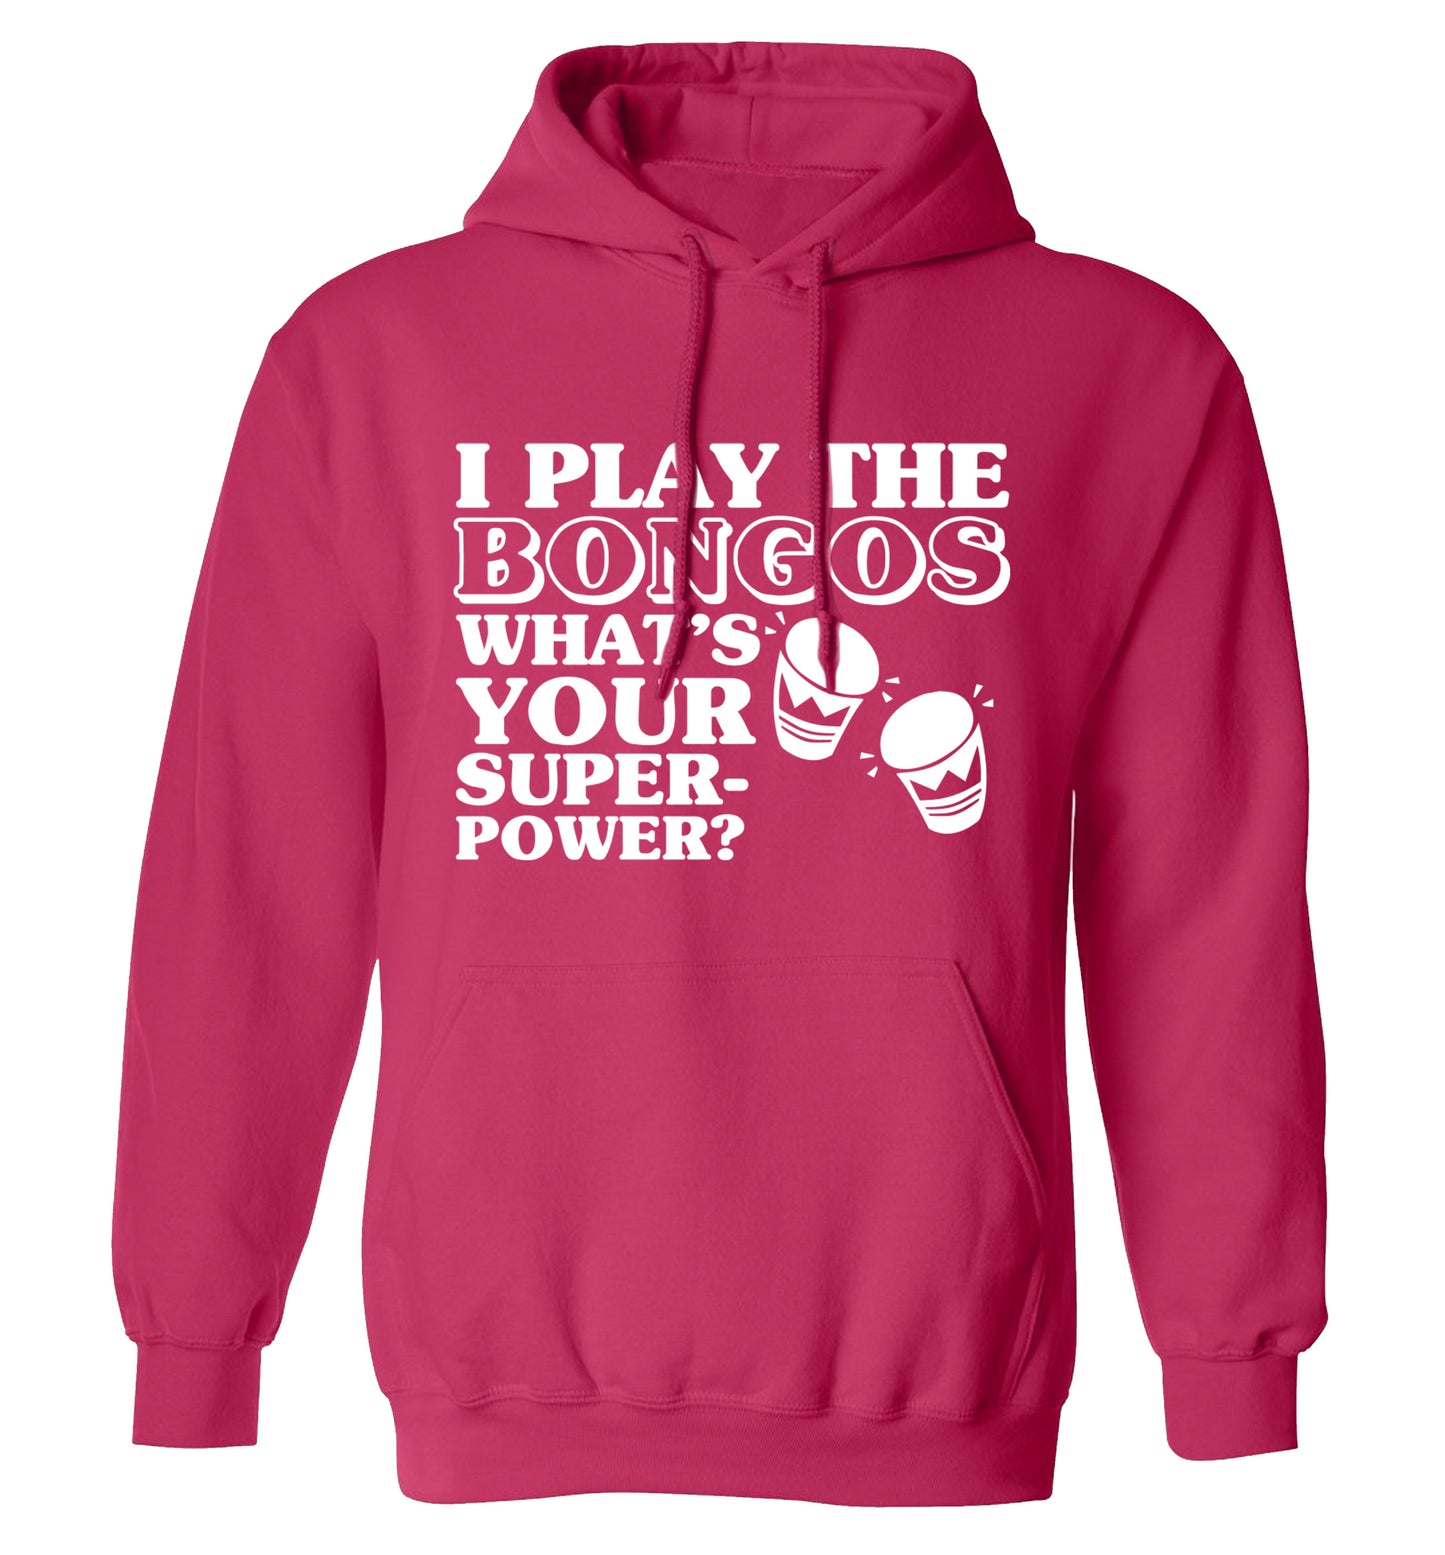 I play the bongos what's your superpower? adults unisexpink hoodie 2XL